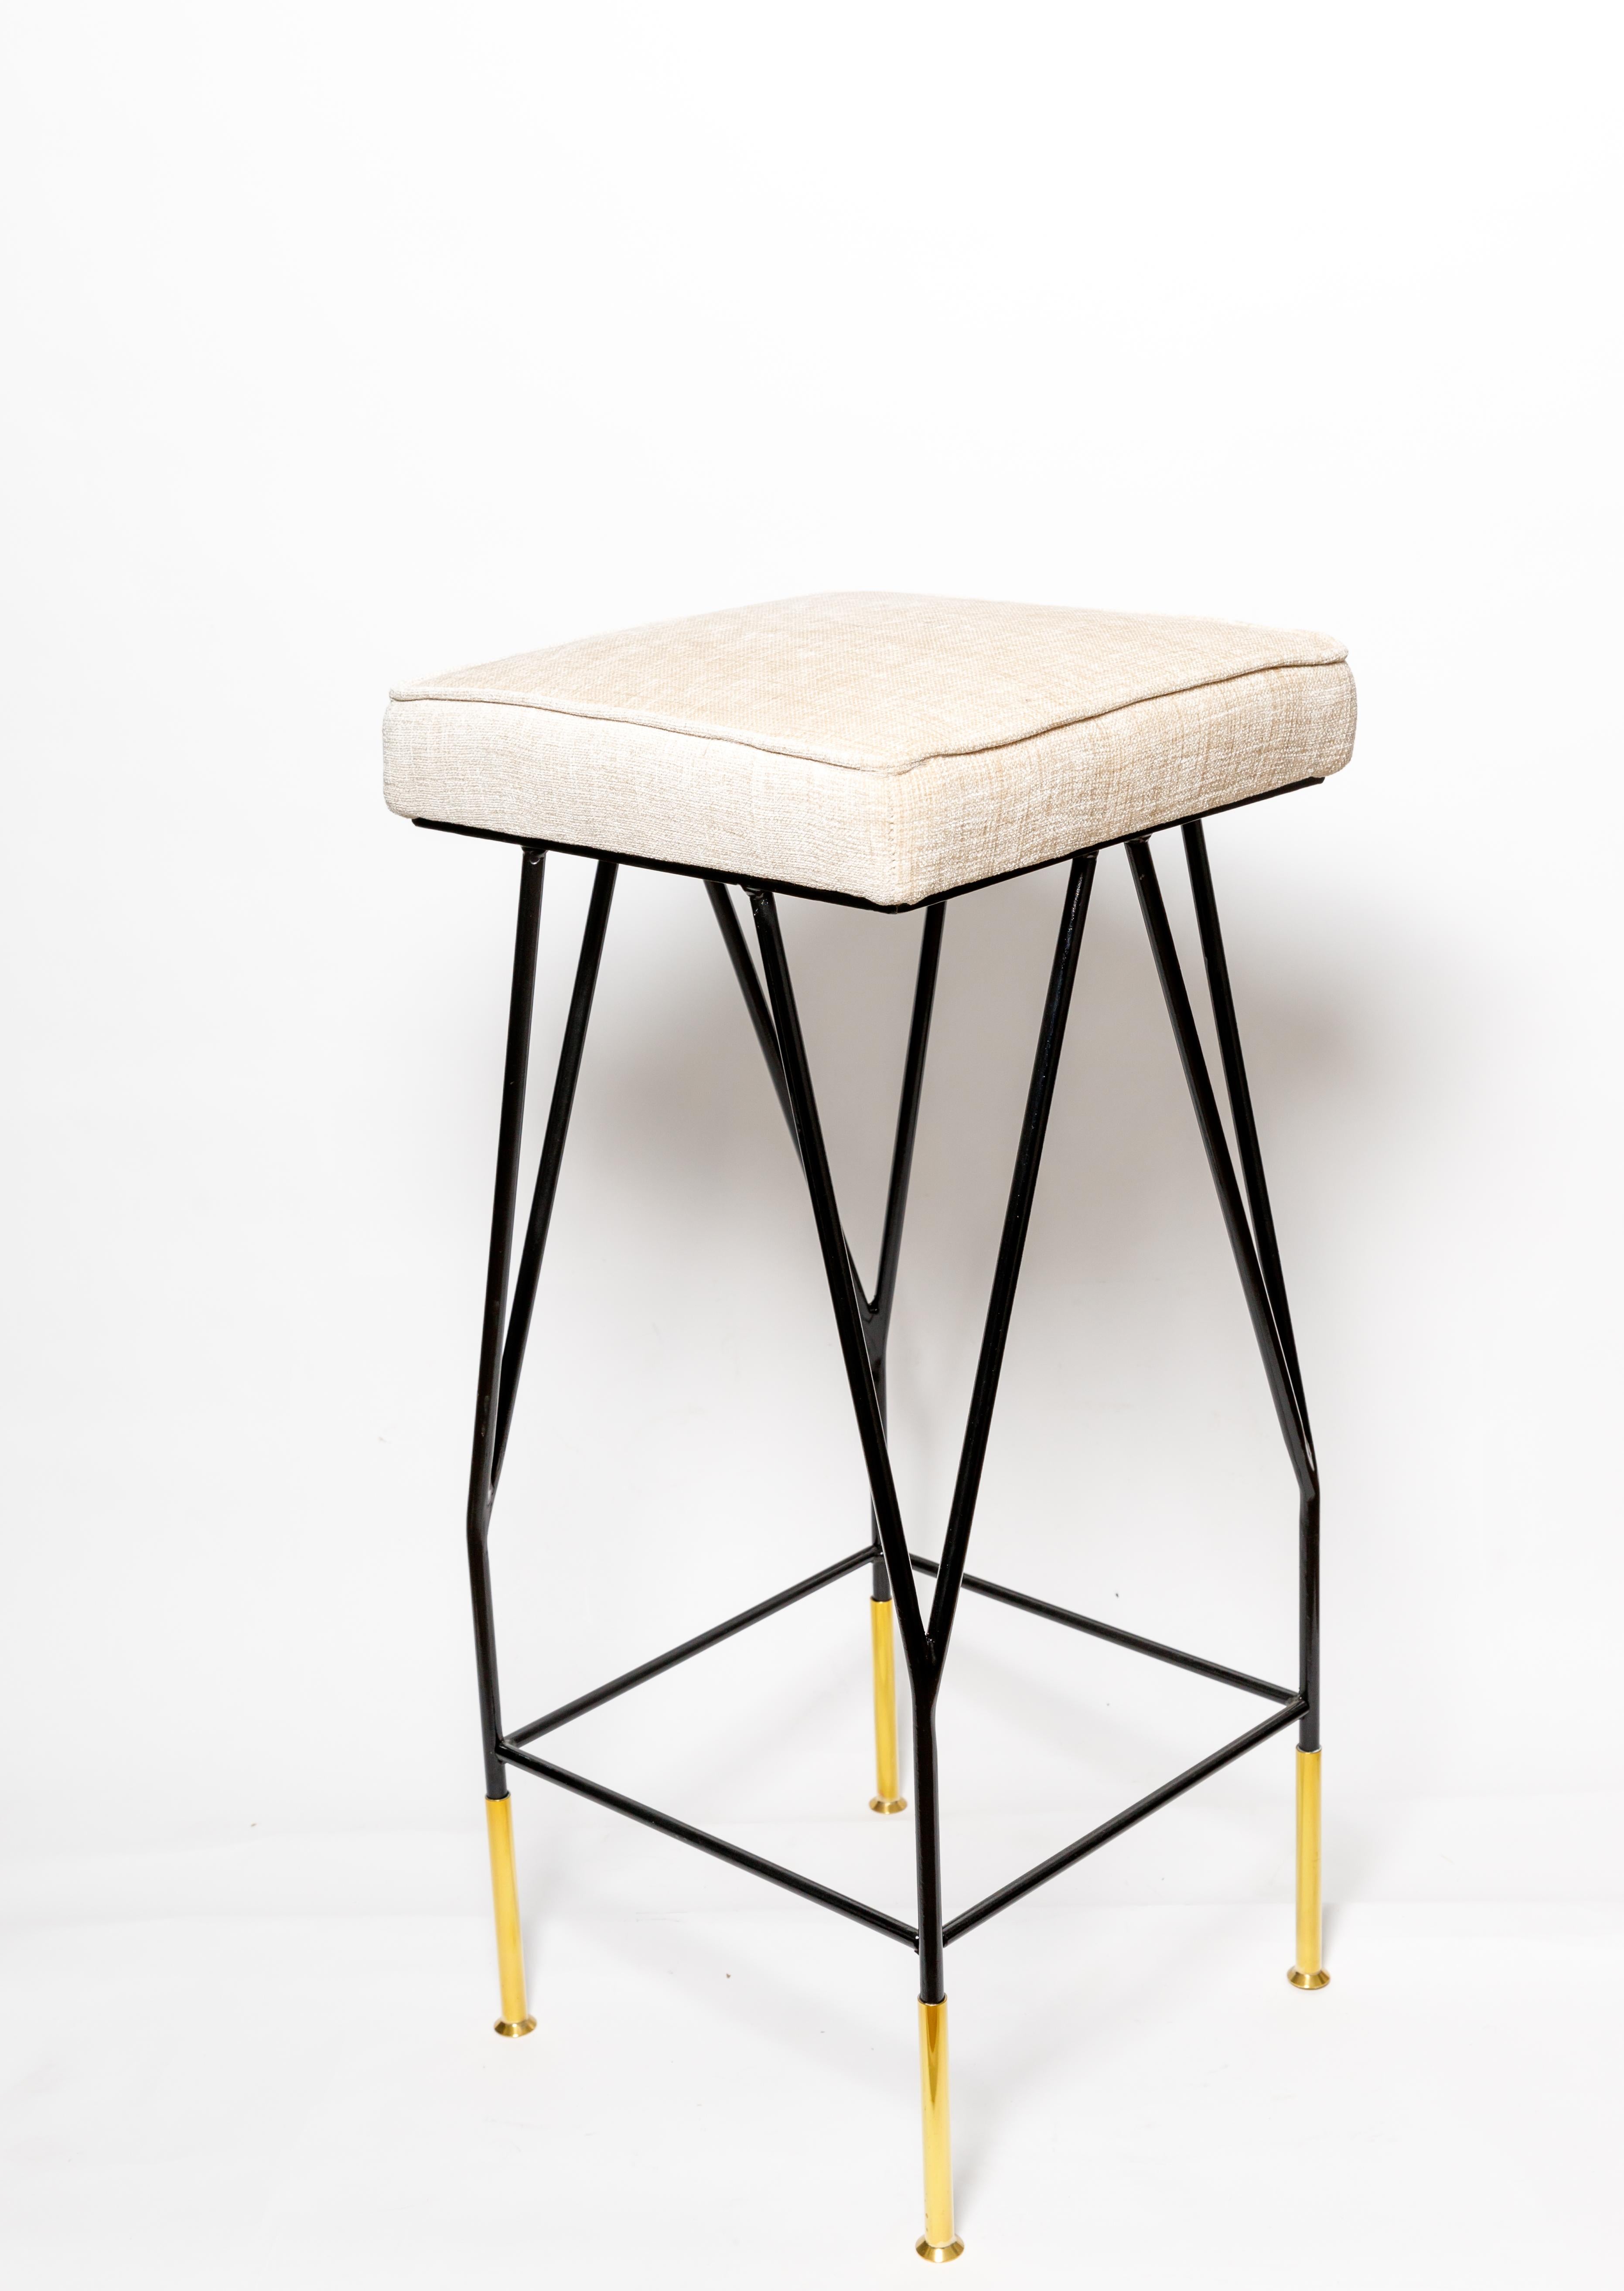 Upholstered enameled iron bar stools with brass details.